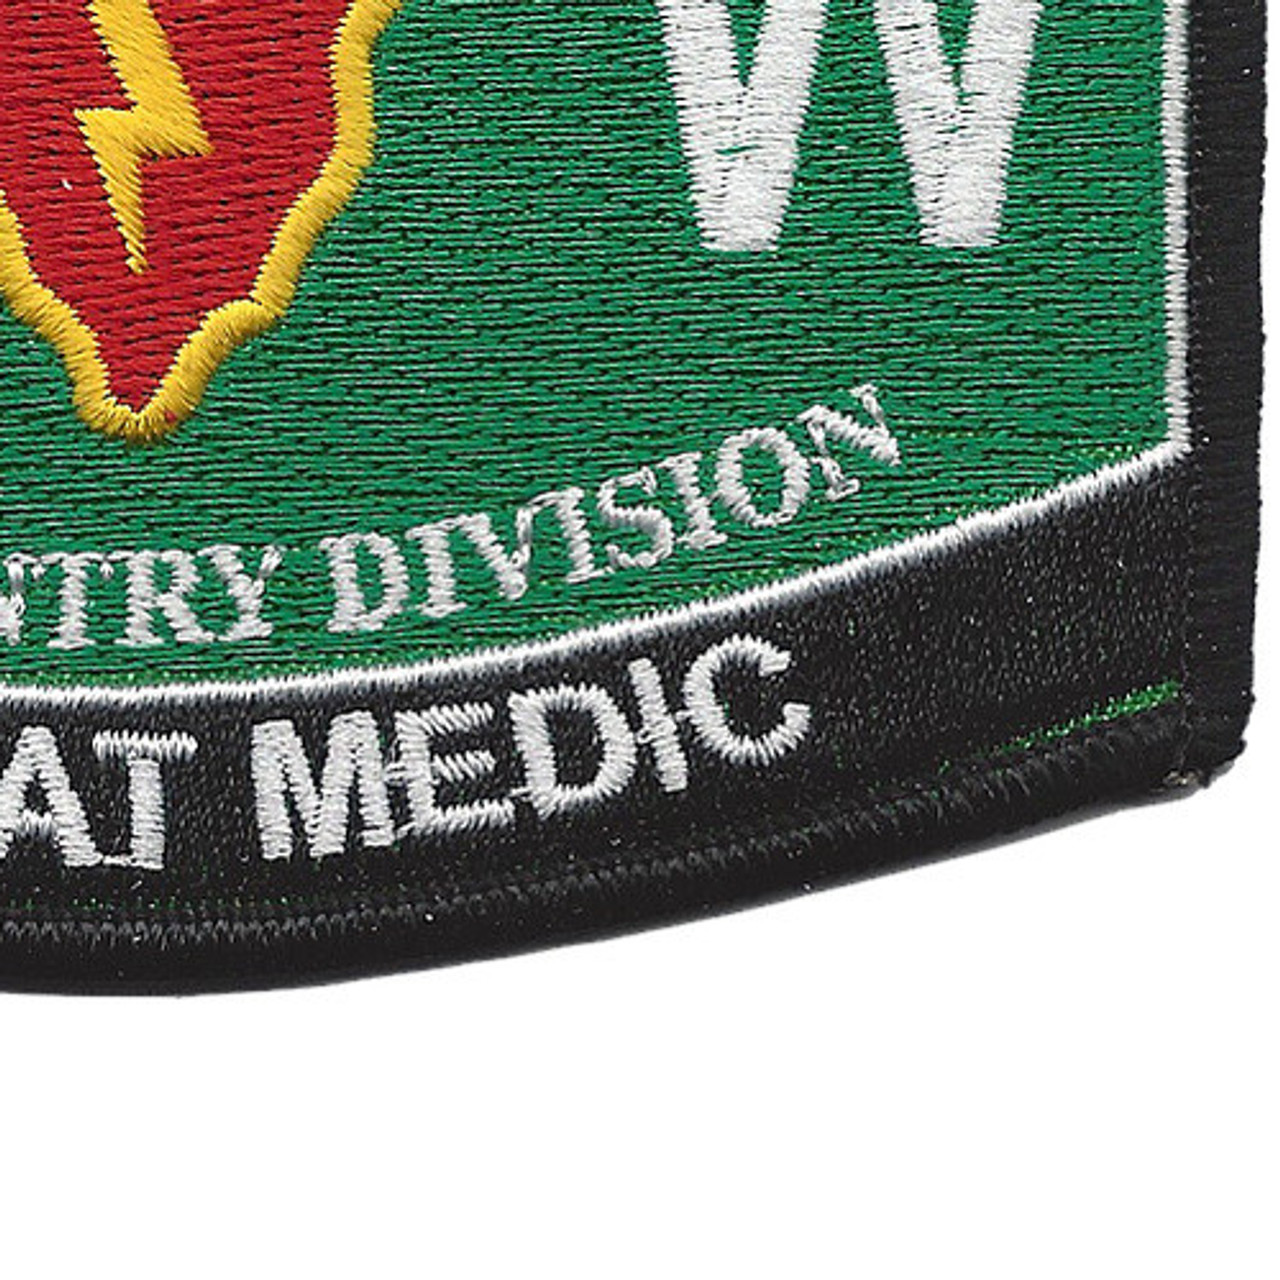 Camouflage Medic Patch - TPL-Medic